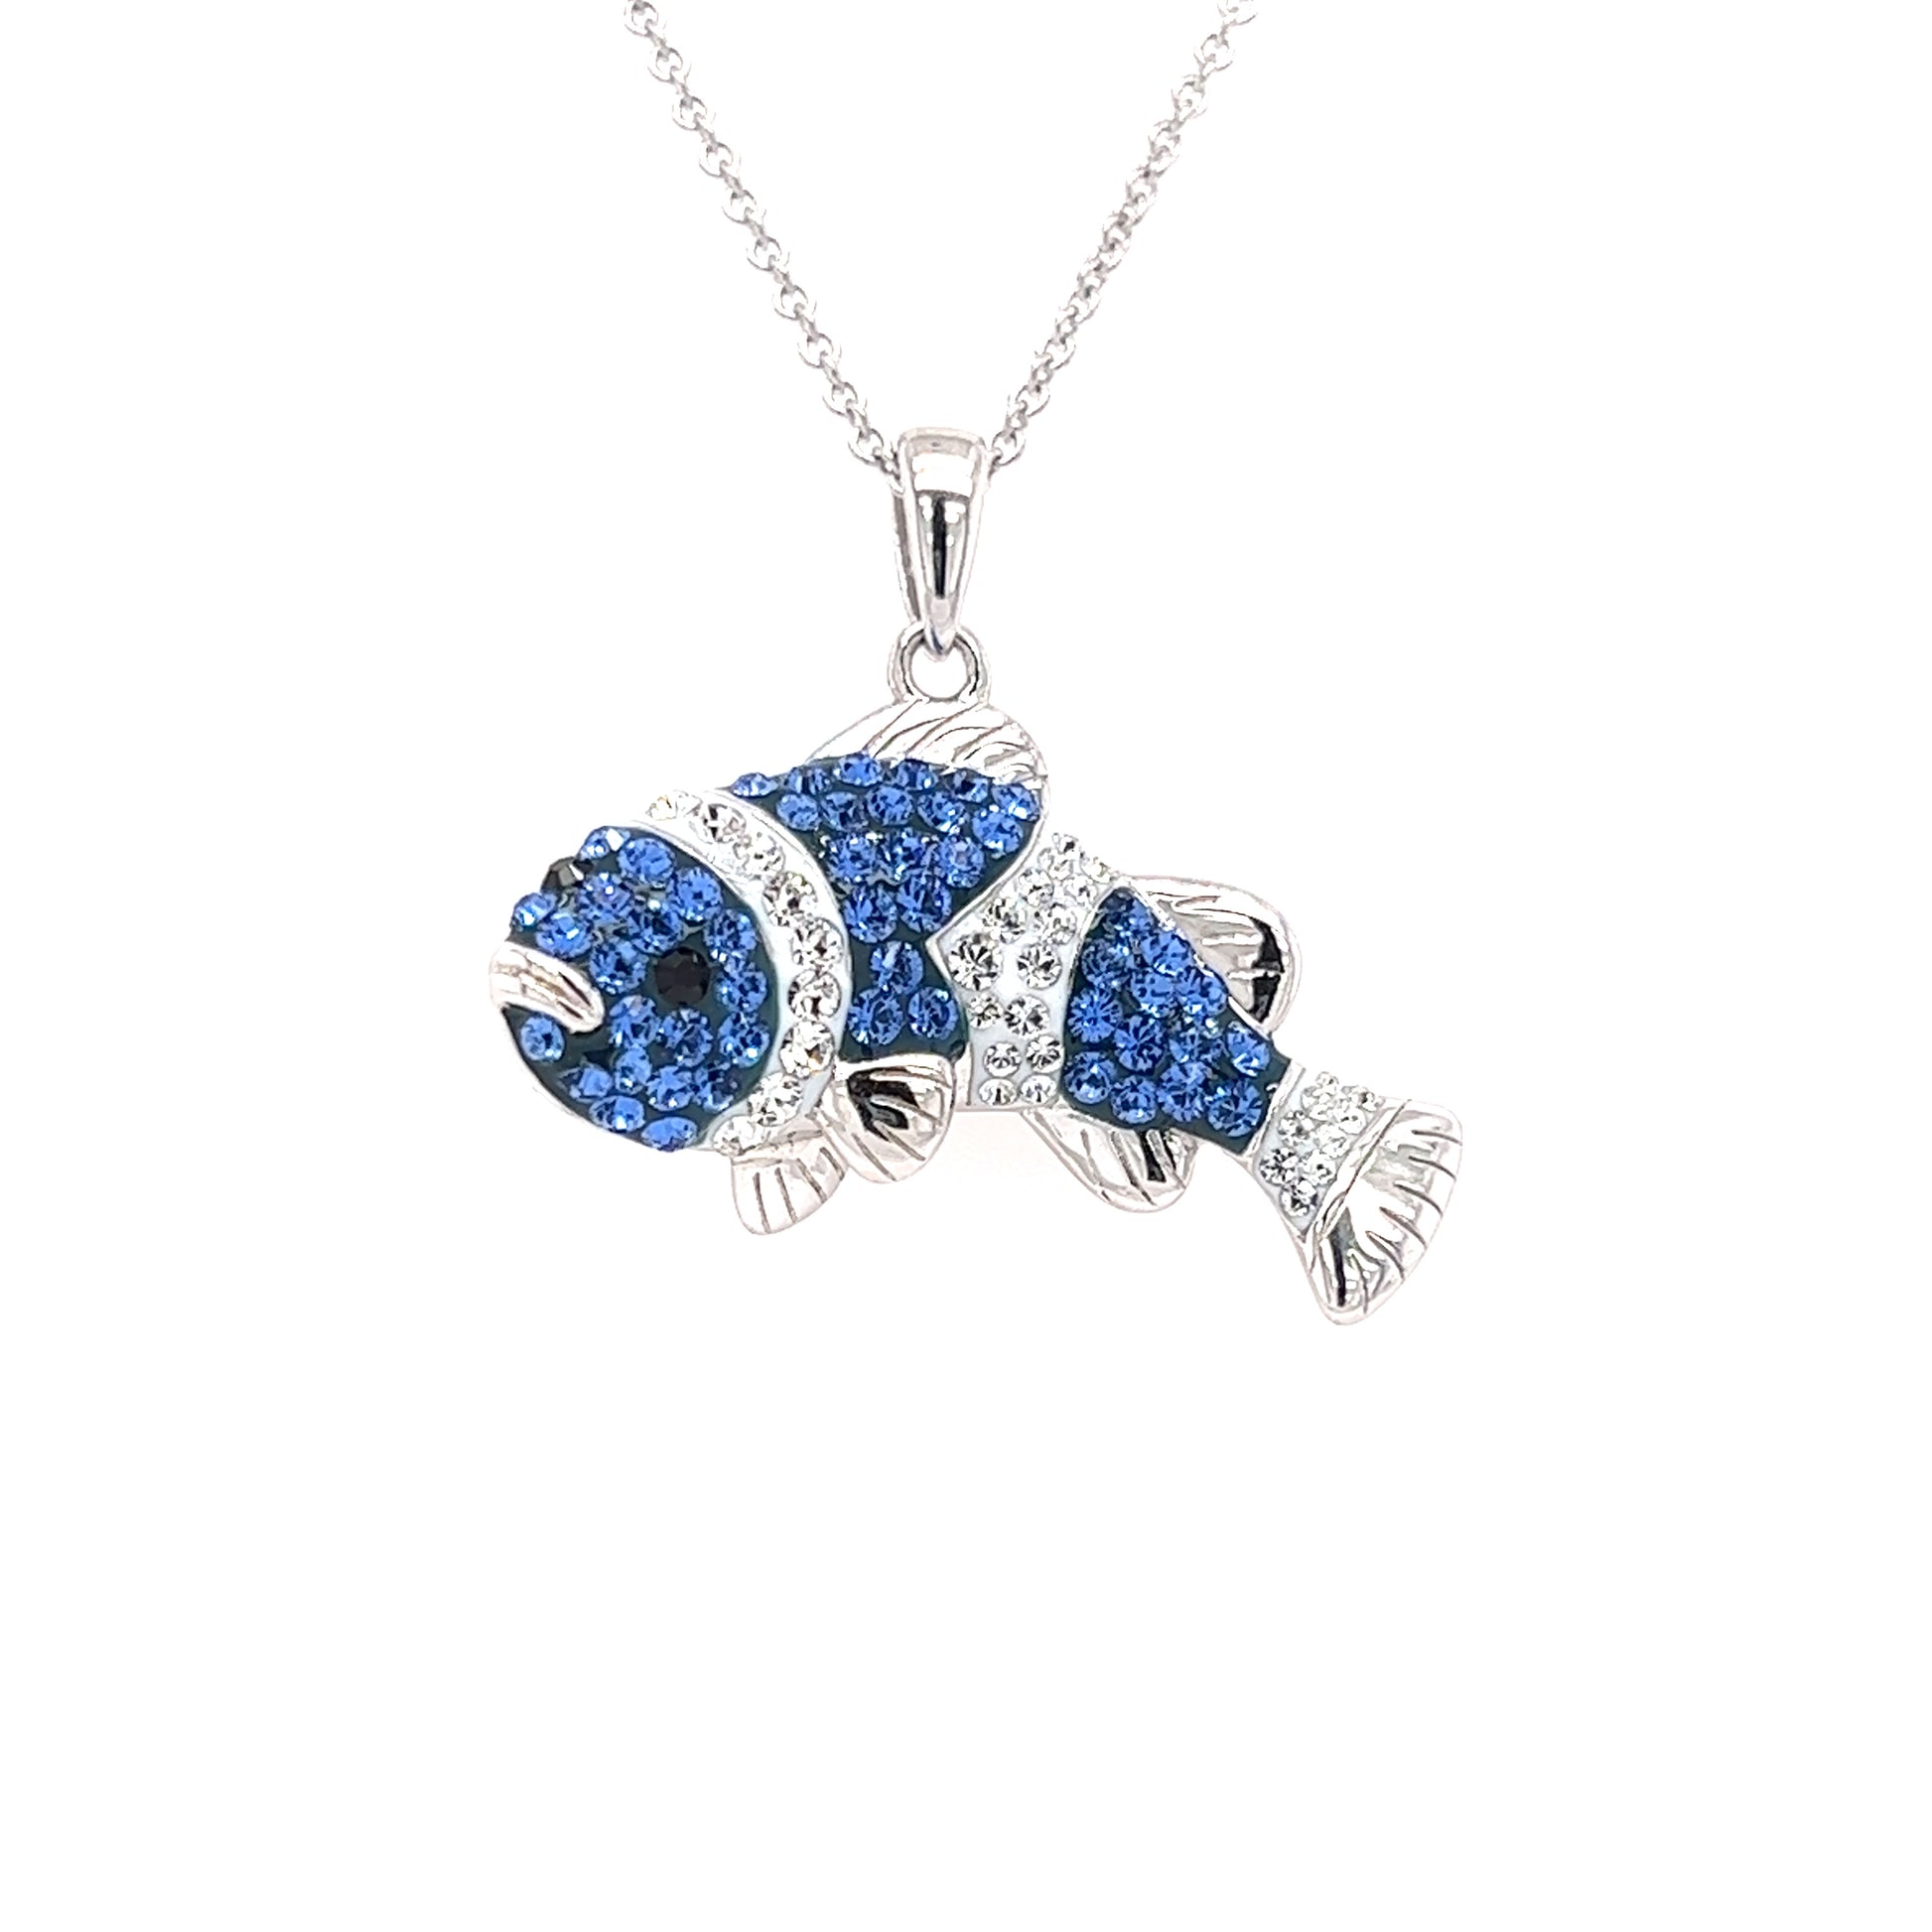 Clownfish Necklace with Blue and White Crystals in Sterling Silver Pendant View